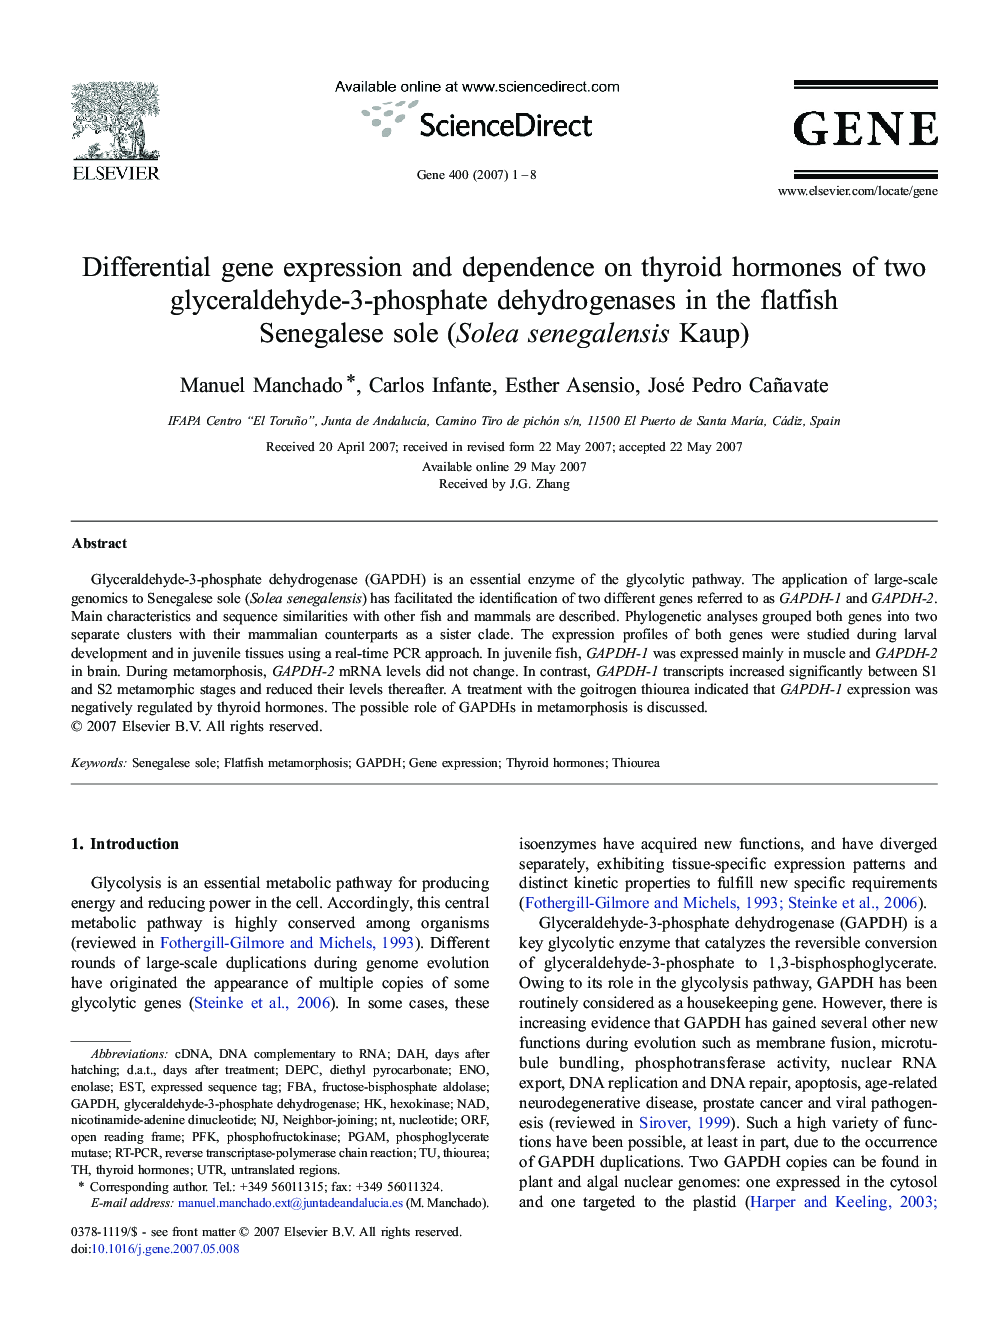 Differential gene expression and dependence on thyroid hormones of two glyceraldehyde-3-phosphate dehydrogenases in the flatfish Senegalese sole (Solea senegalensis Kaup)